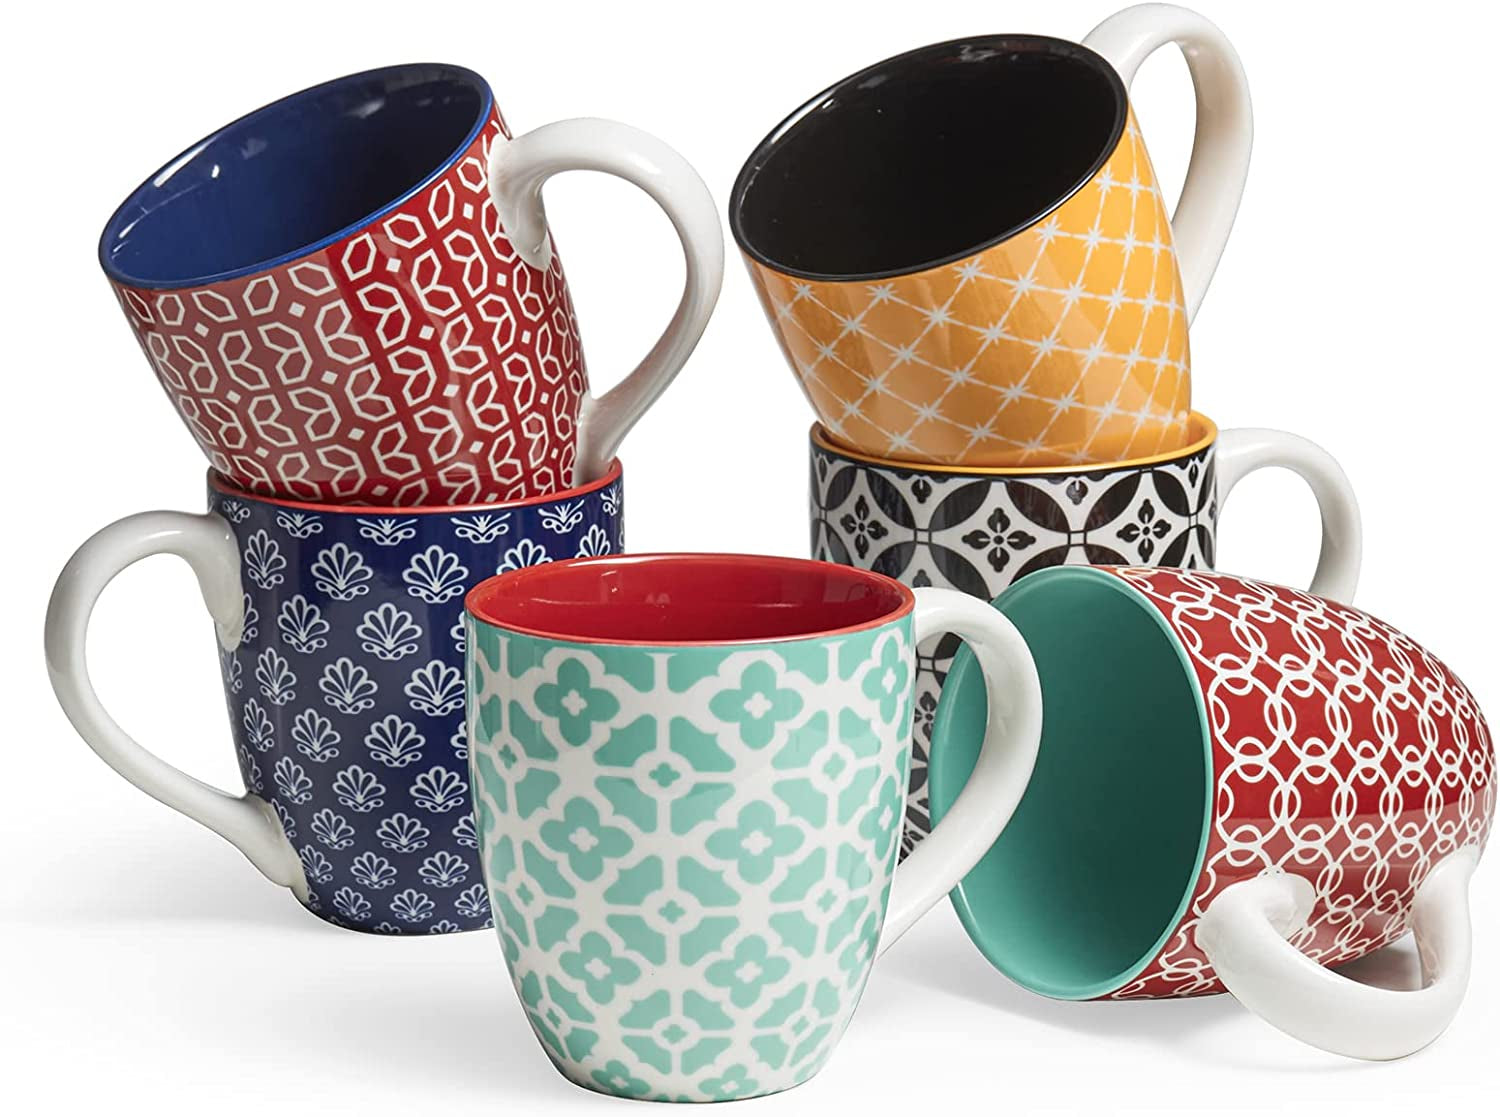 Coffee Mugs Set of 6, Colorful 19 Oz Large Porcelain Mugs with Handle for Coffee Tea and Cocoa, Ceramic Coffee Cups for Women Men, Vibrant Colors, Housewarming Gift